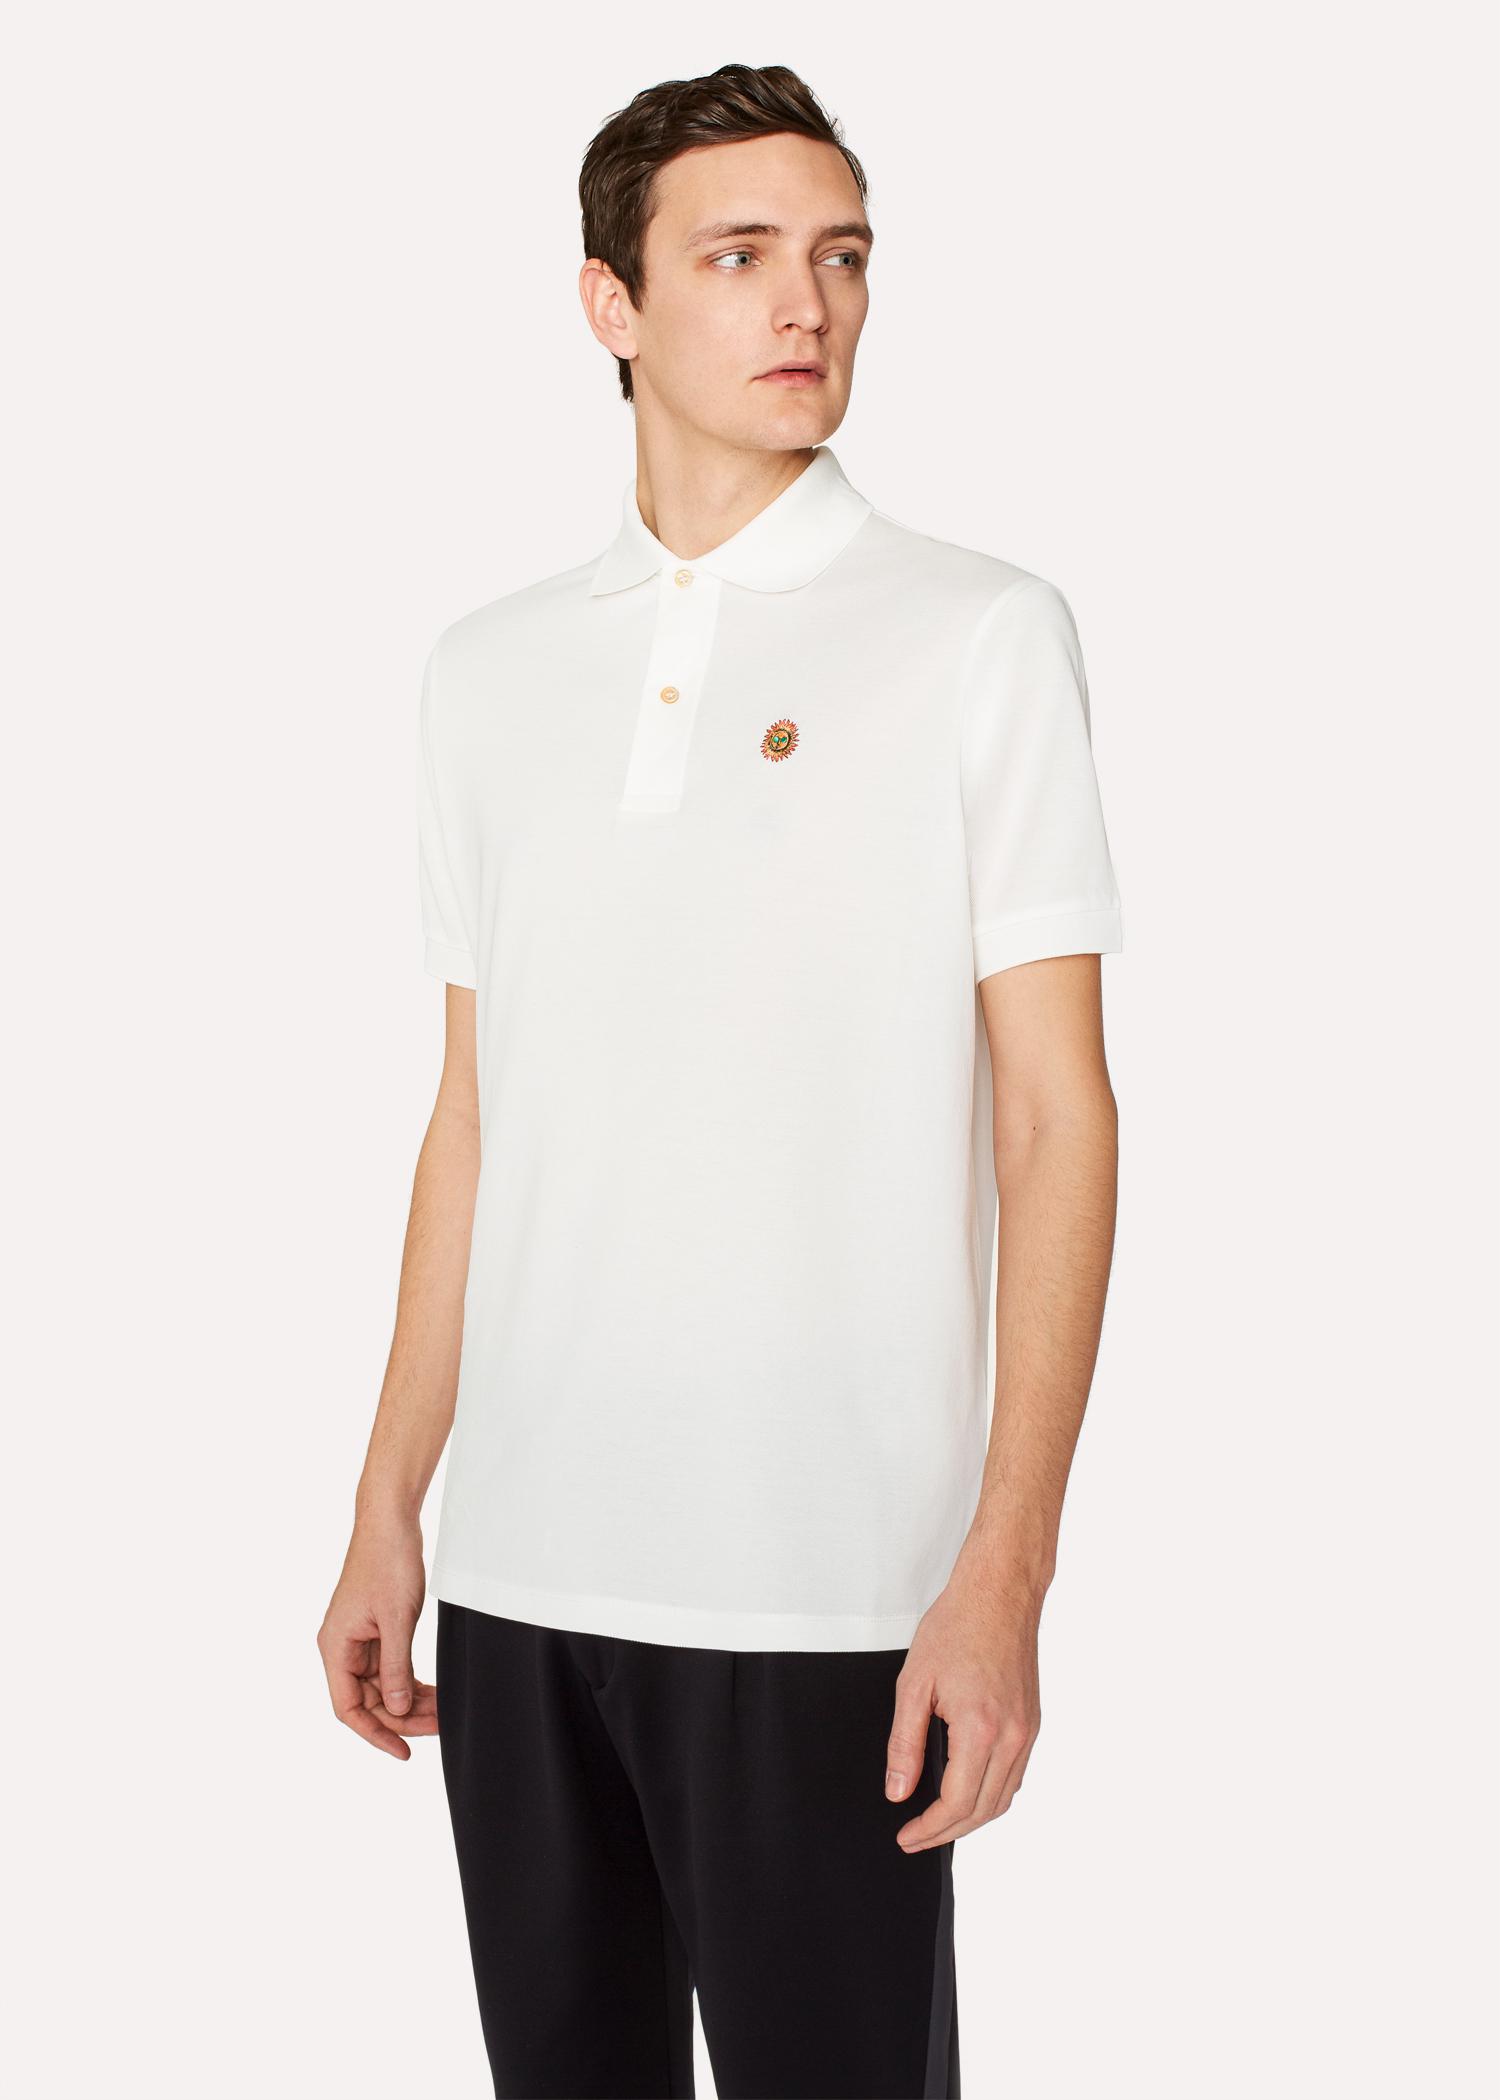 Lyst - Paul Smith Slim-Fit White Cotton-Piqué Polo Shirt With